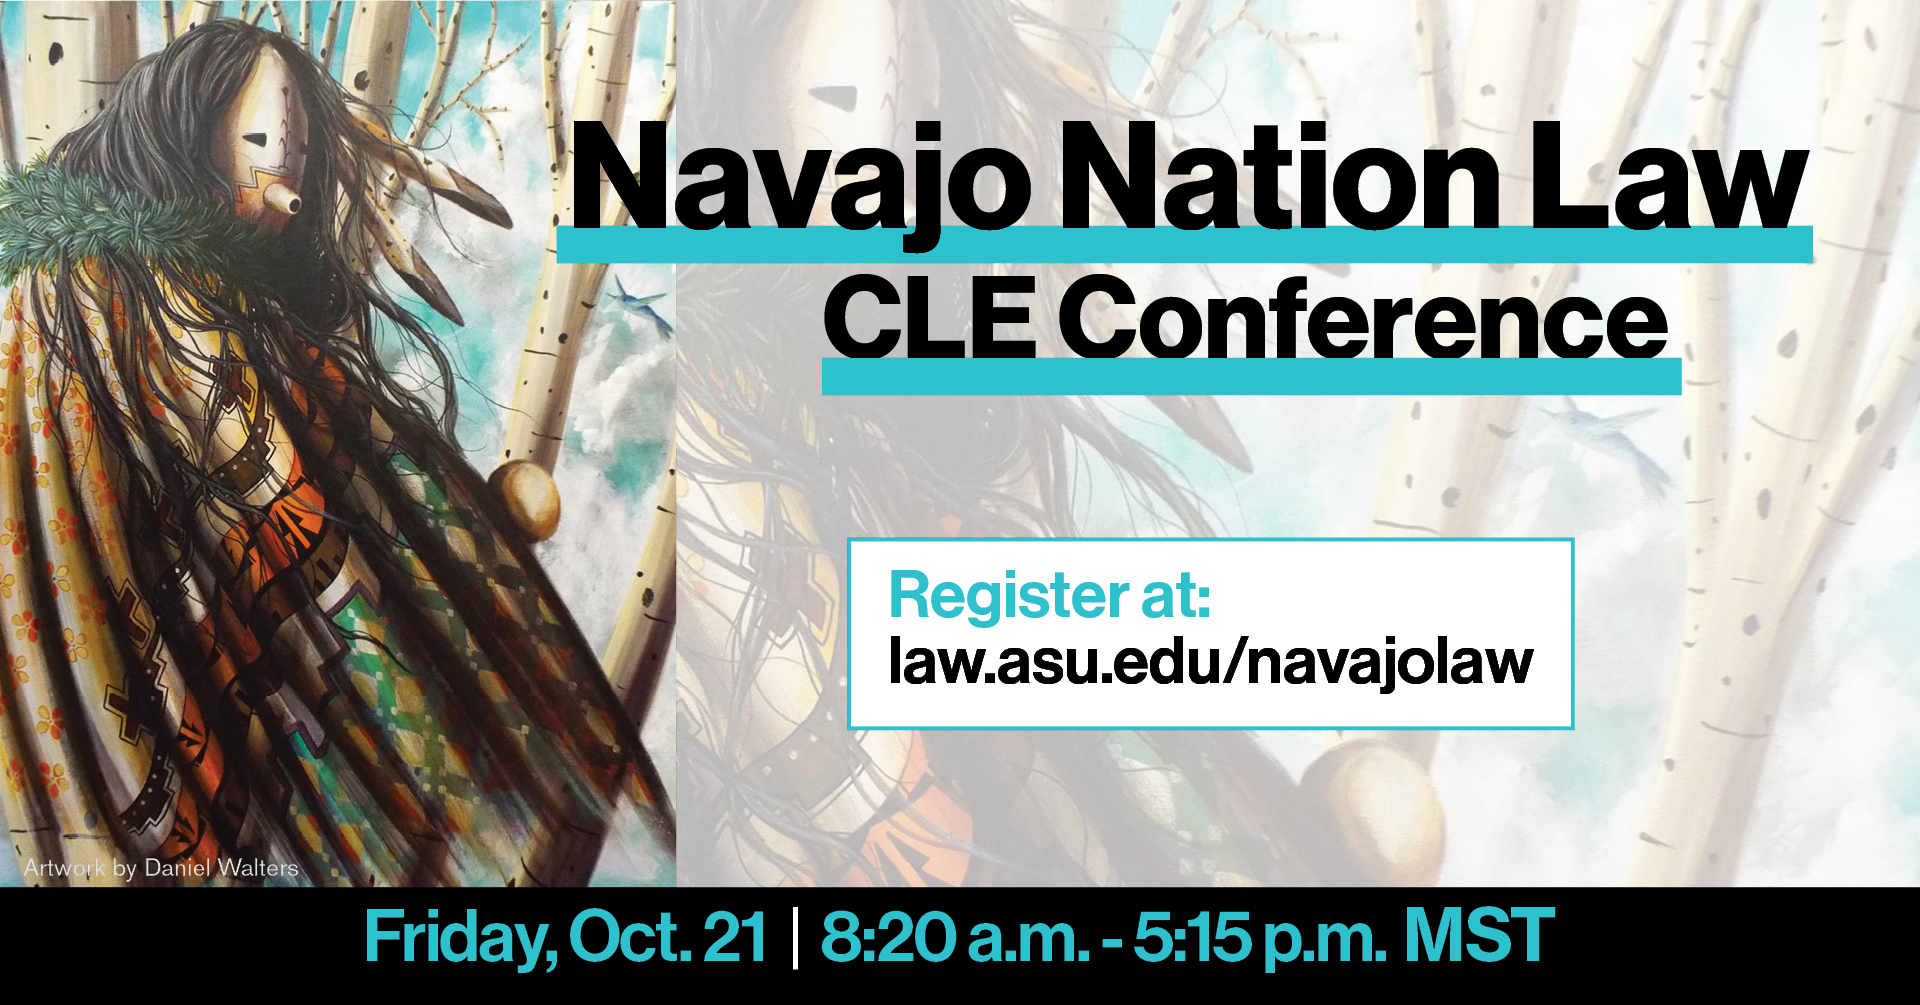  Navajo Nation Law CLE Conference